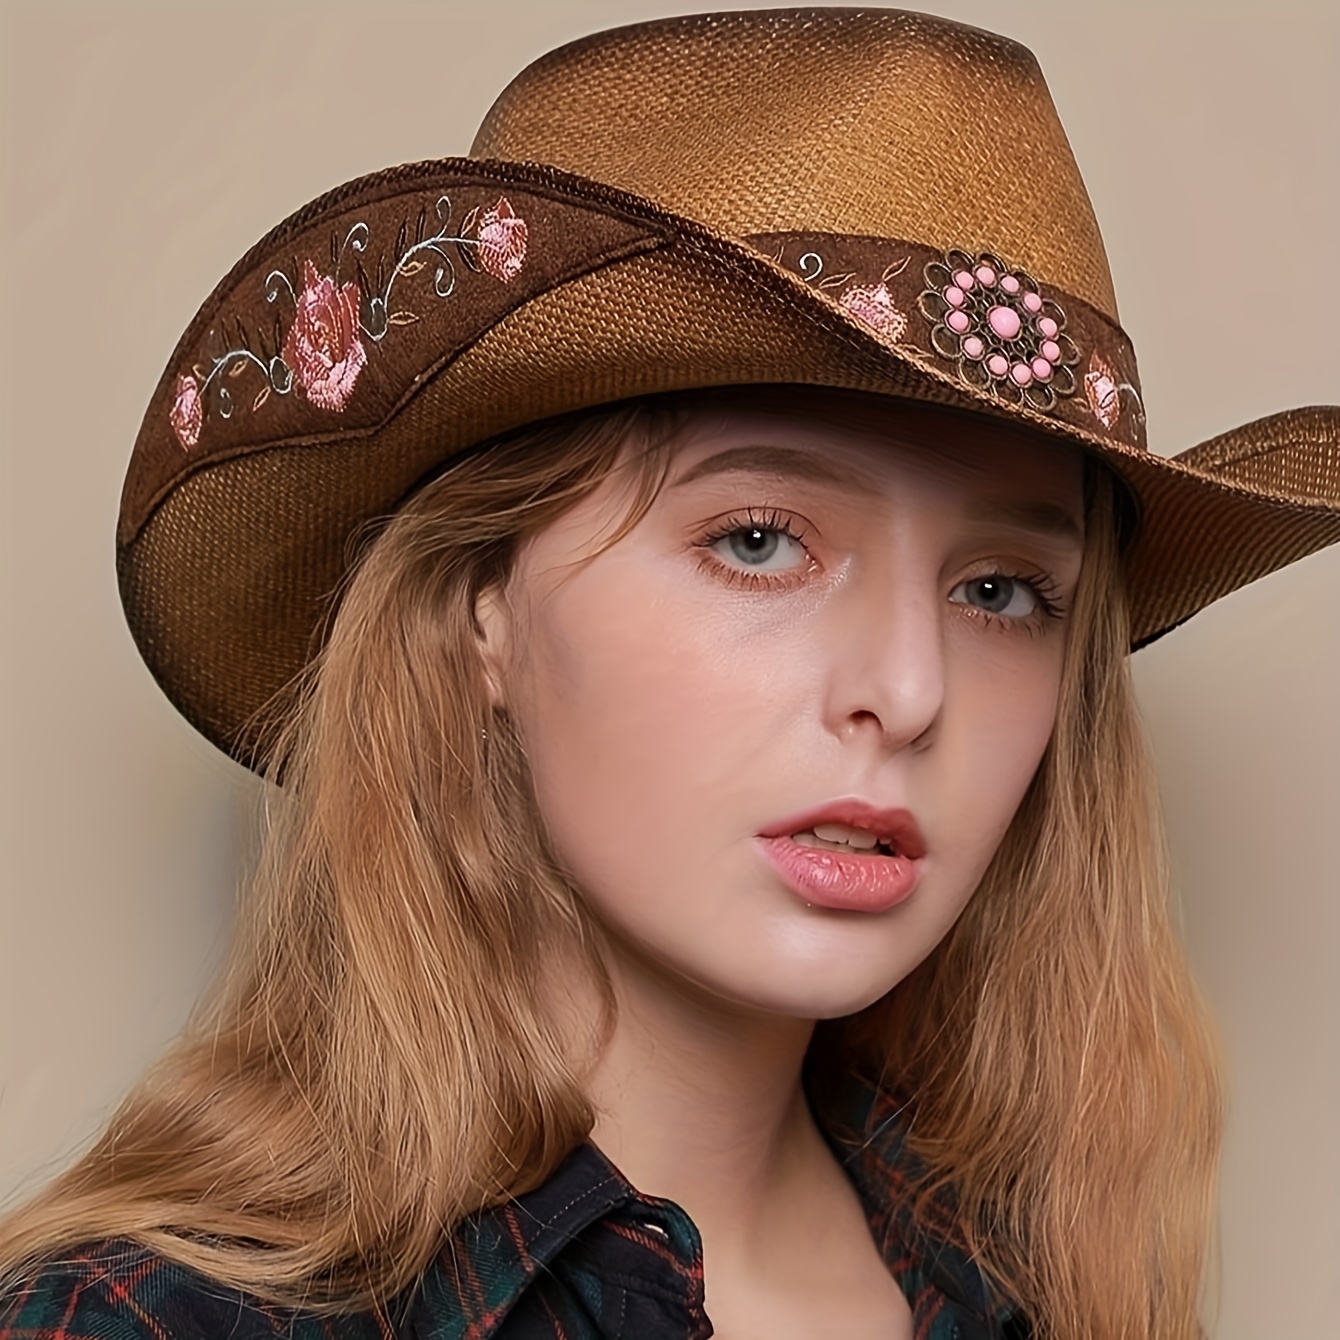 

Handmade Straw Cowboy Hat For Women, Western Summer Outing Panama Hat, Elegant Personalized Fedora With Floral Embellishments